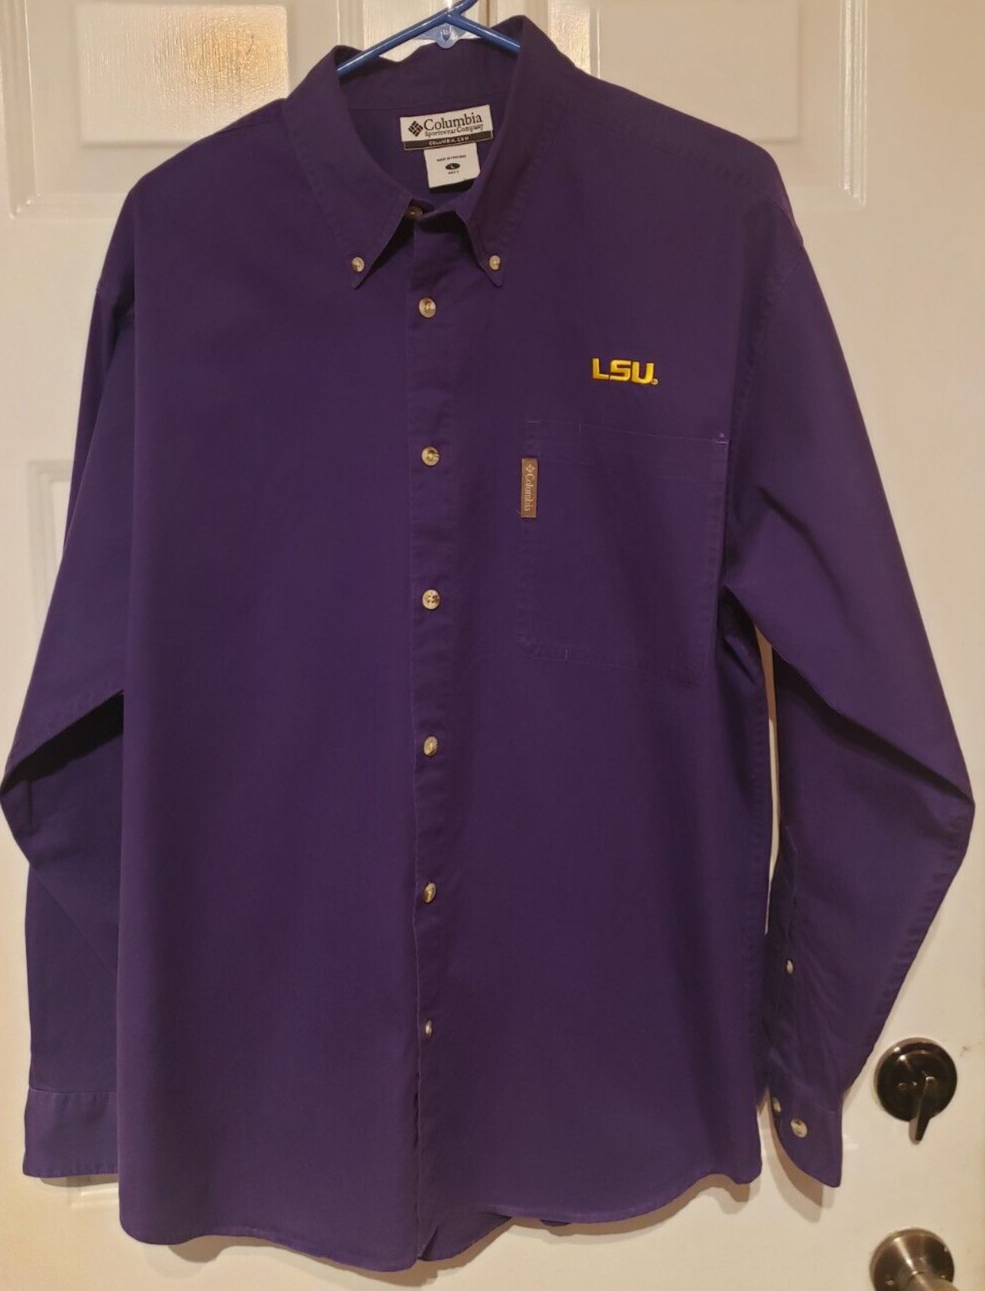 Primary image for LSU Tigers Columbia Shirt Mens Size Large Long Sleeve Purple Embroidered Logo